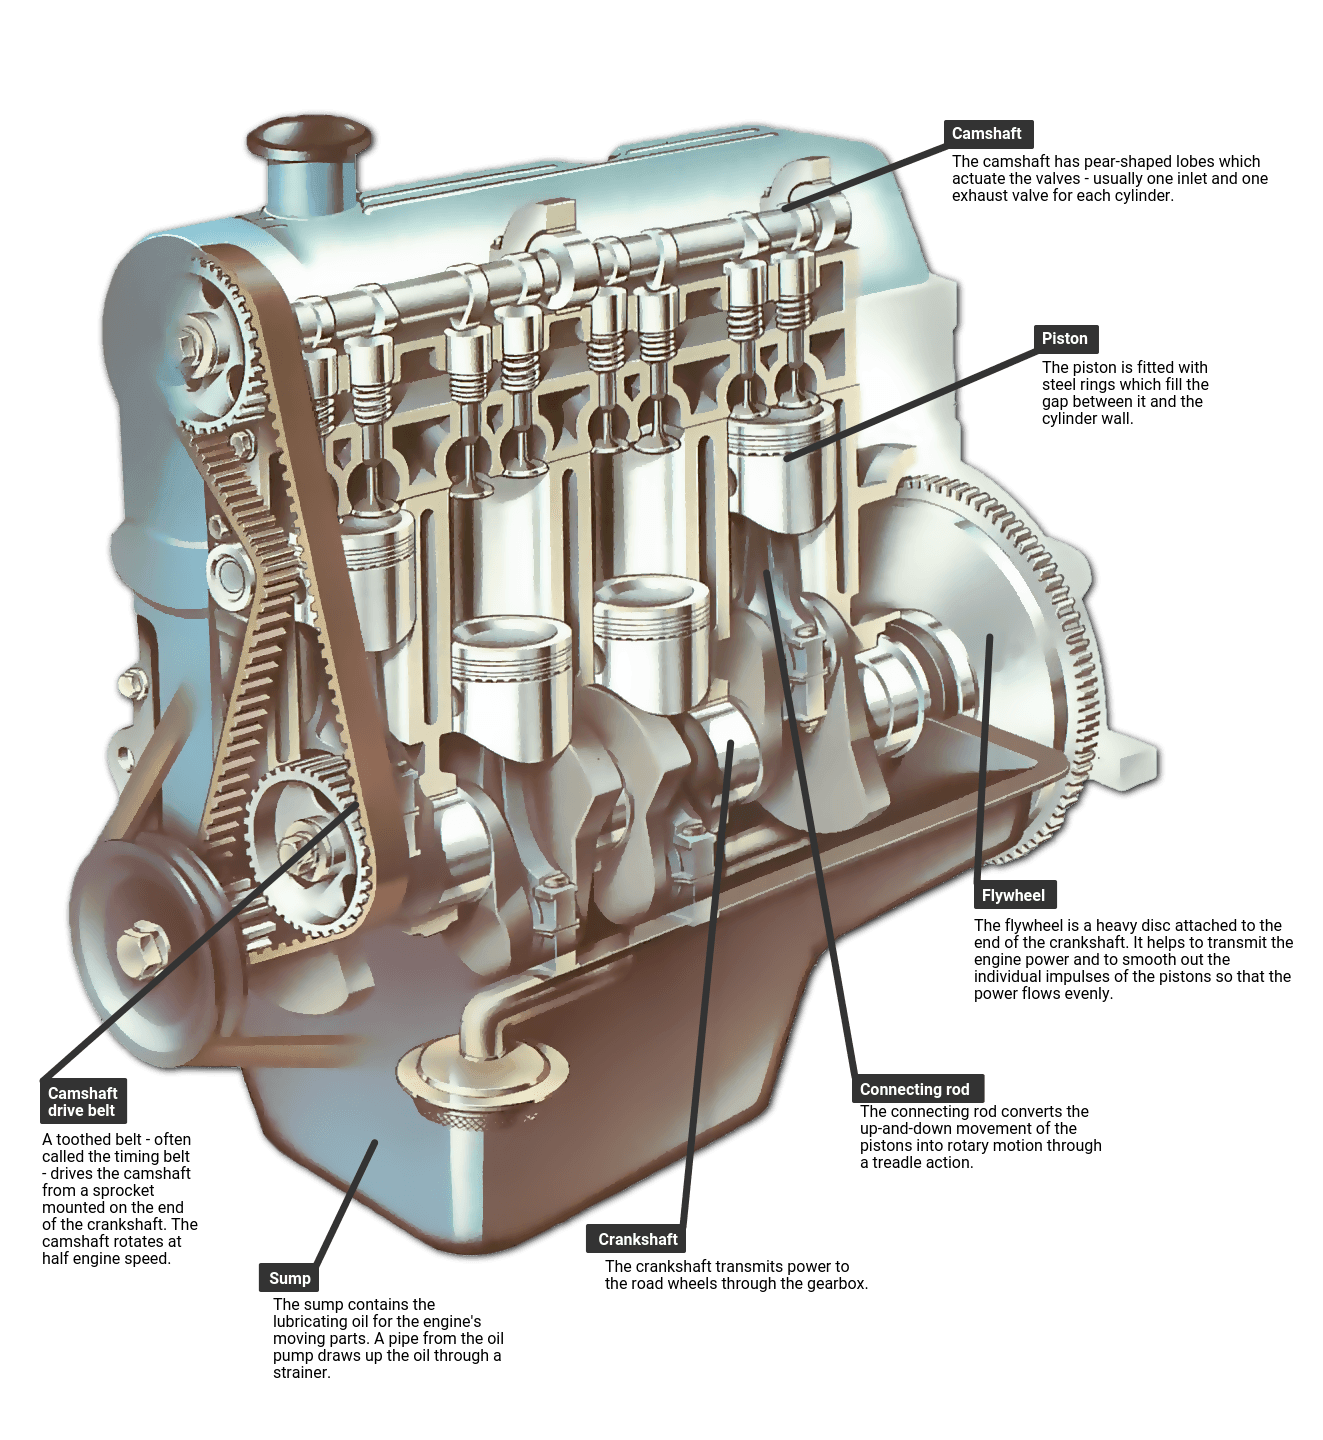 What Are The Main Parts Of A Car Engine?